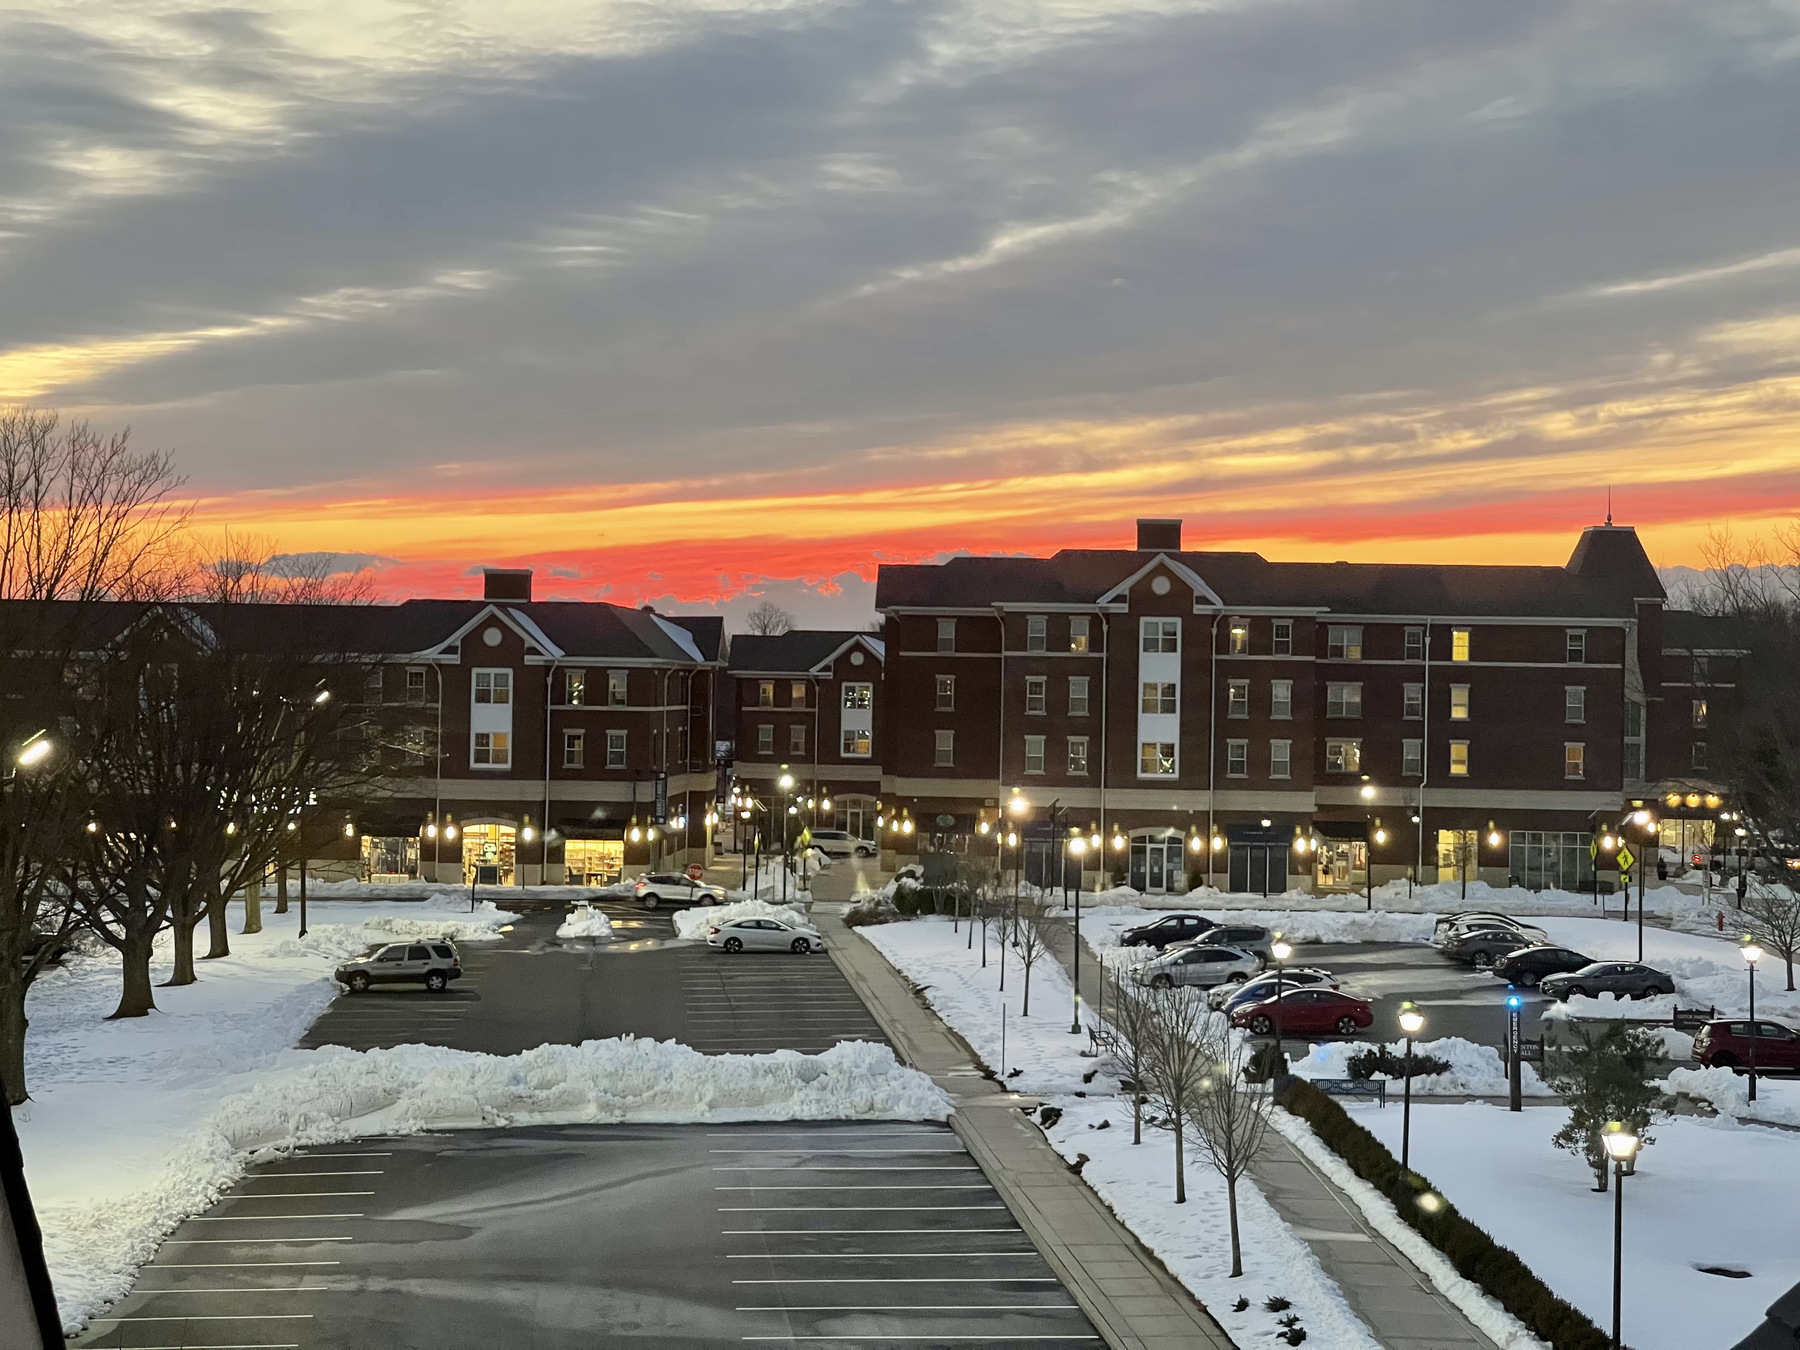 Campus Town at twilight after a Winter storm at The College of New Jersey